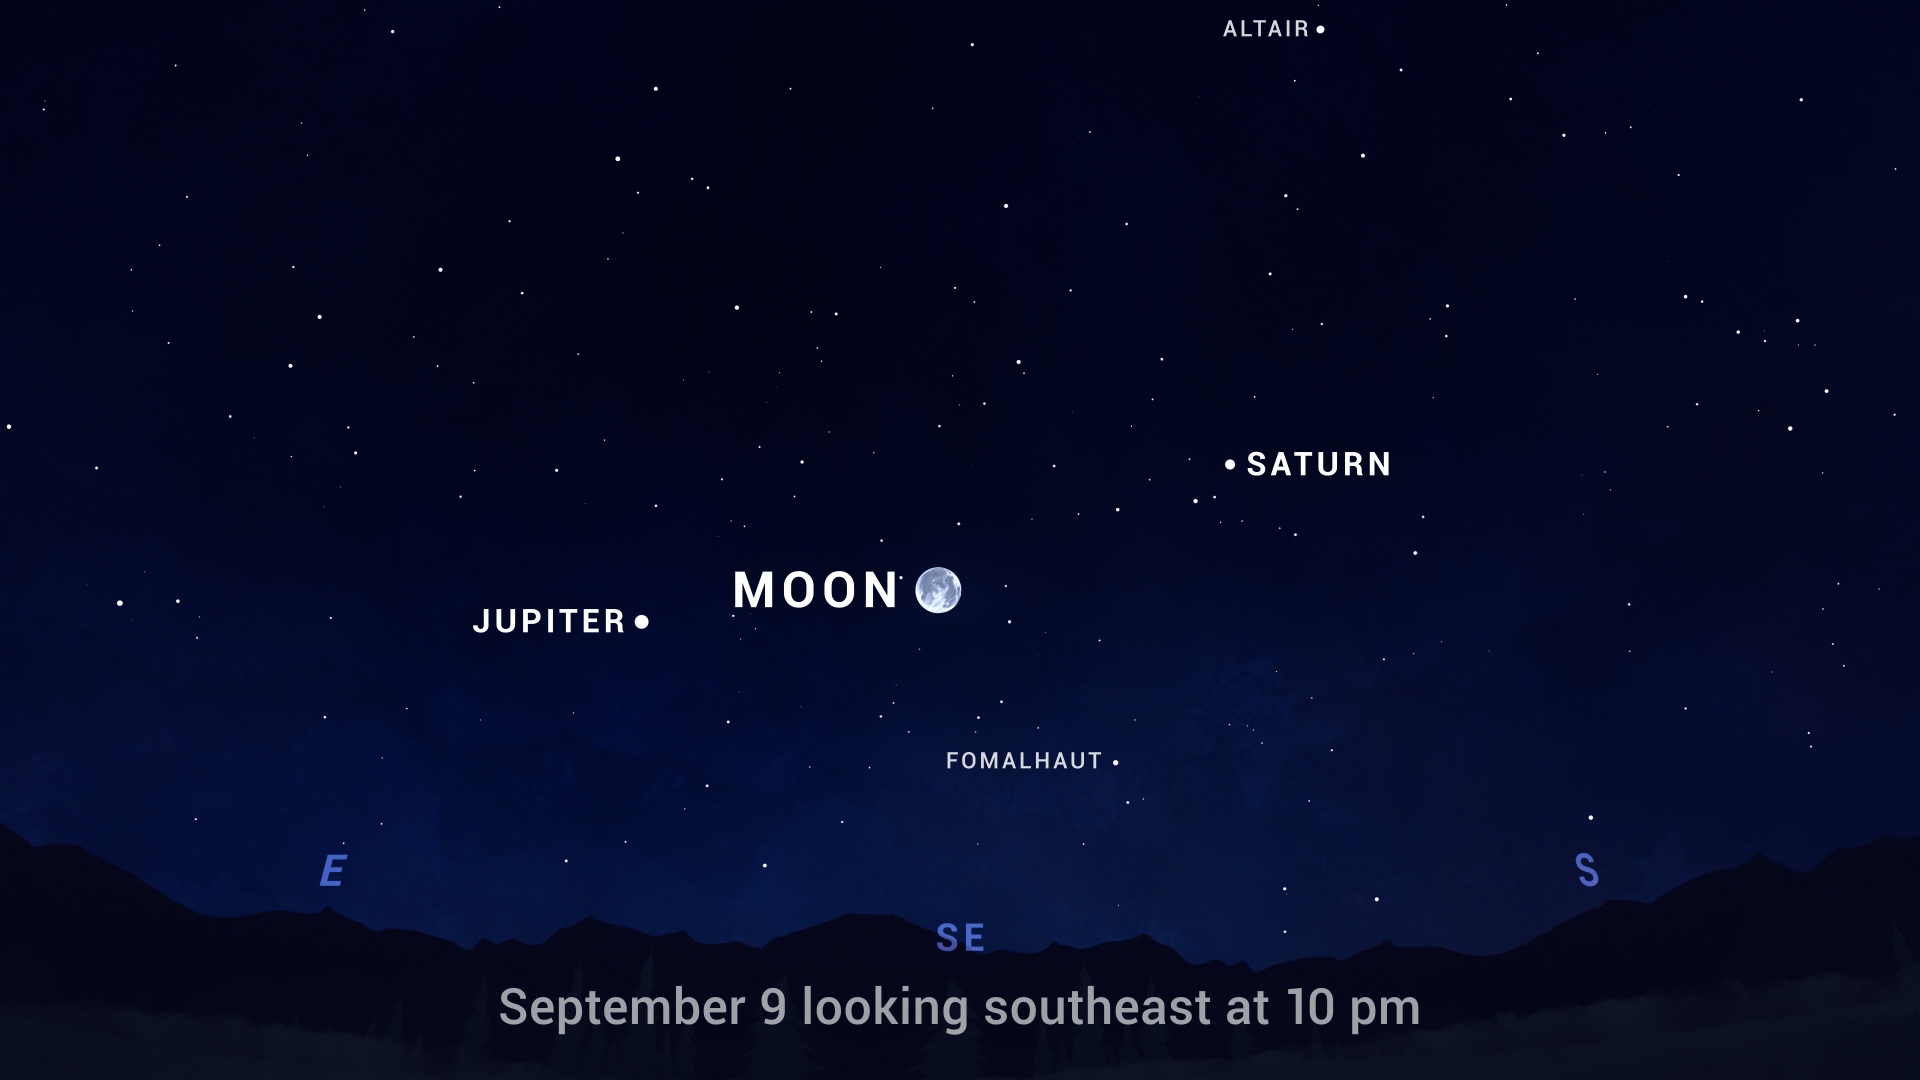 skychart showing the Moon, Jupiter, and Saturn